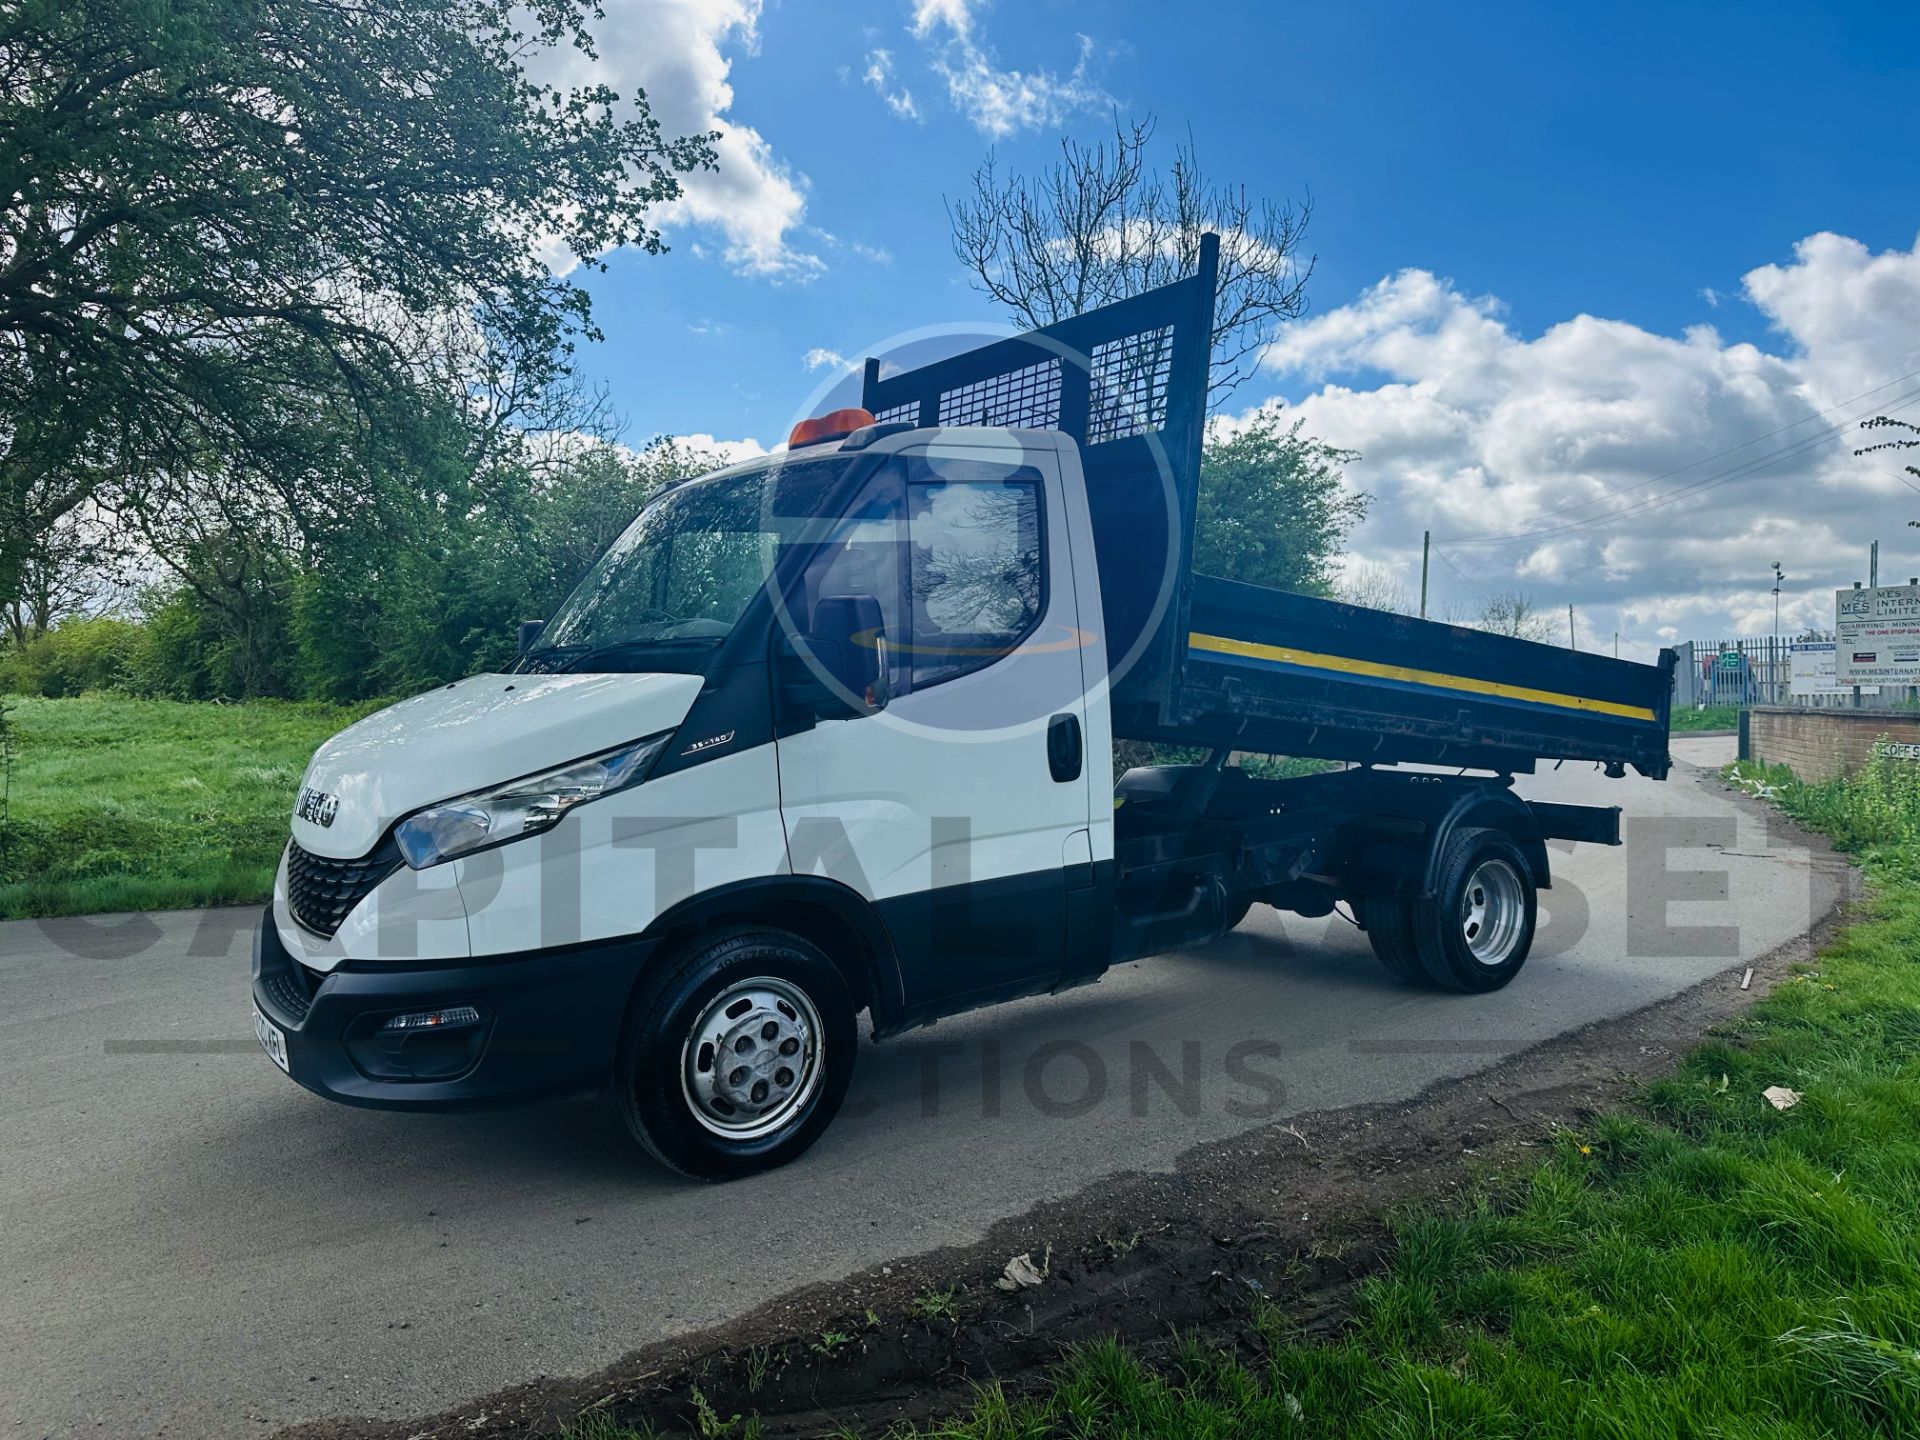 (ON SALE) IVECO DAILY 35C14 *SINGLE CAB - TIPPER TRUCK* (2020 - EURO 6) 2.3 DIESEL - (3500 KG) - Image 5 of 28